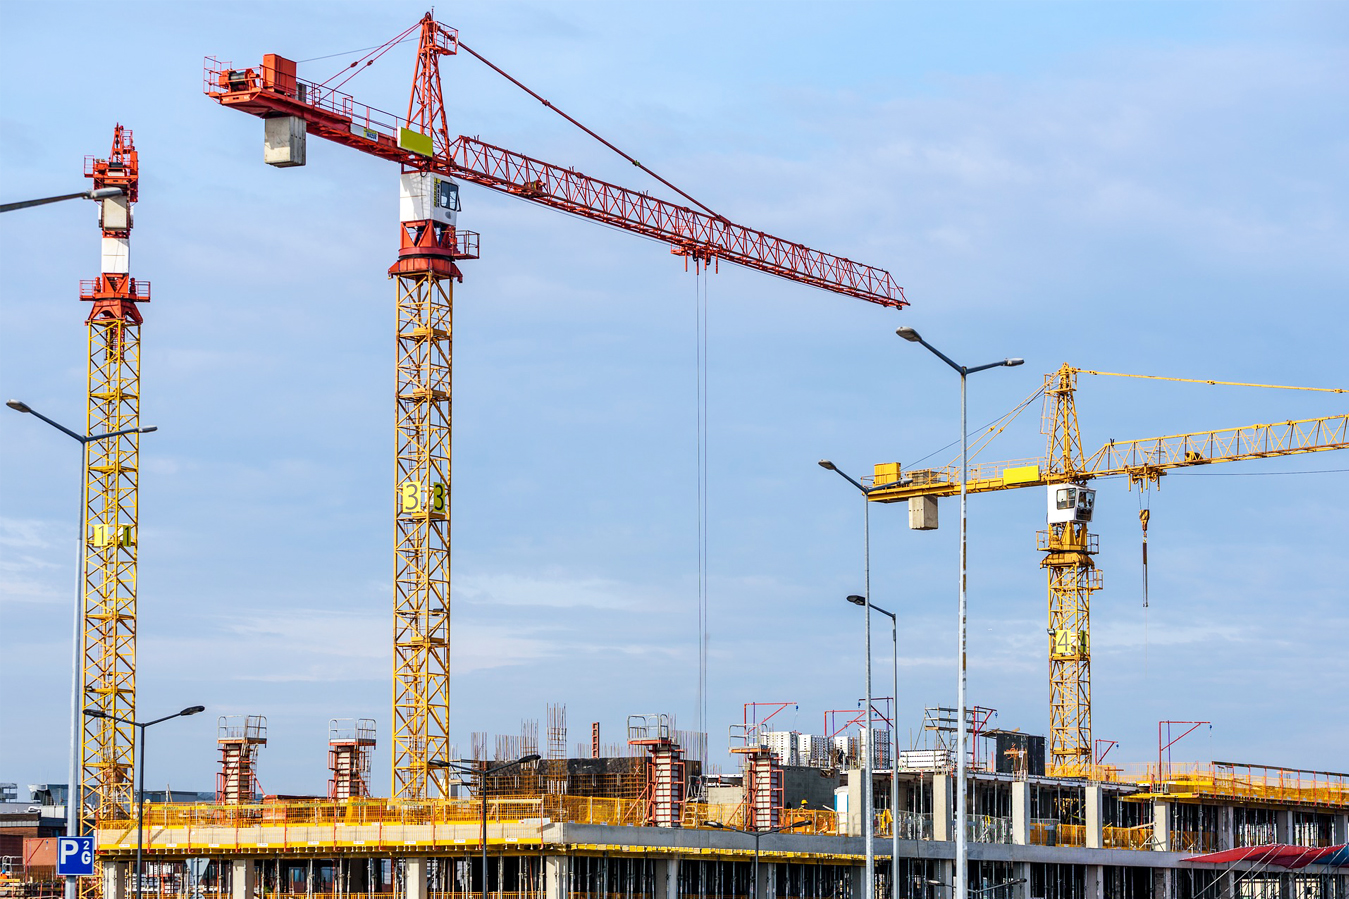 Construction Management Software For Today’s Most Demanding Construction Projects